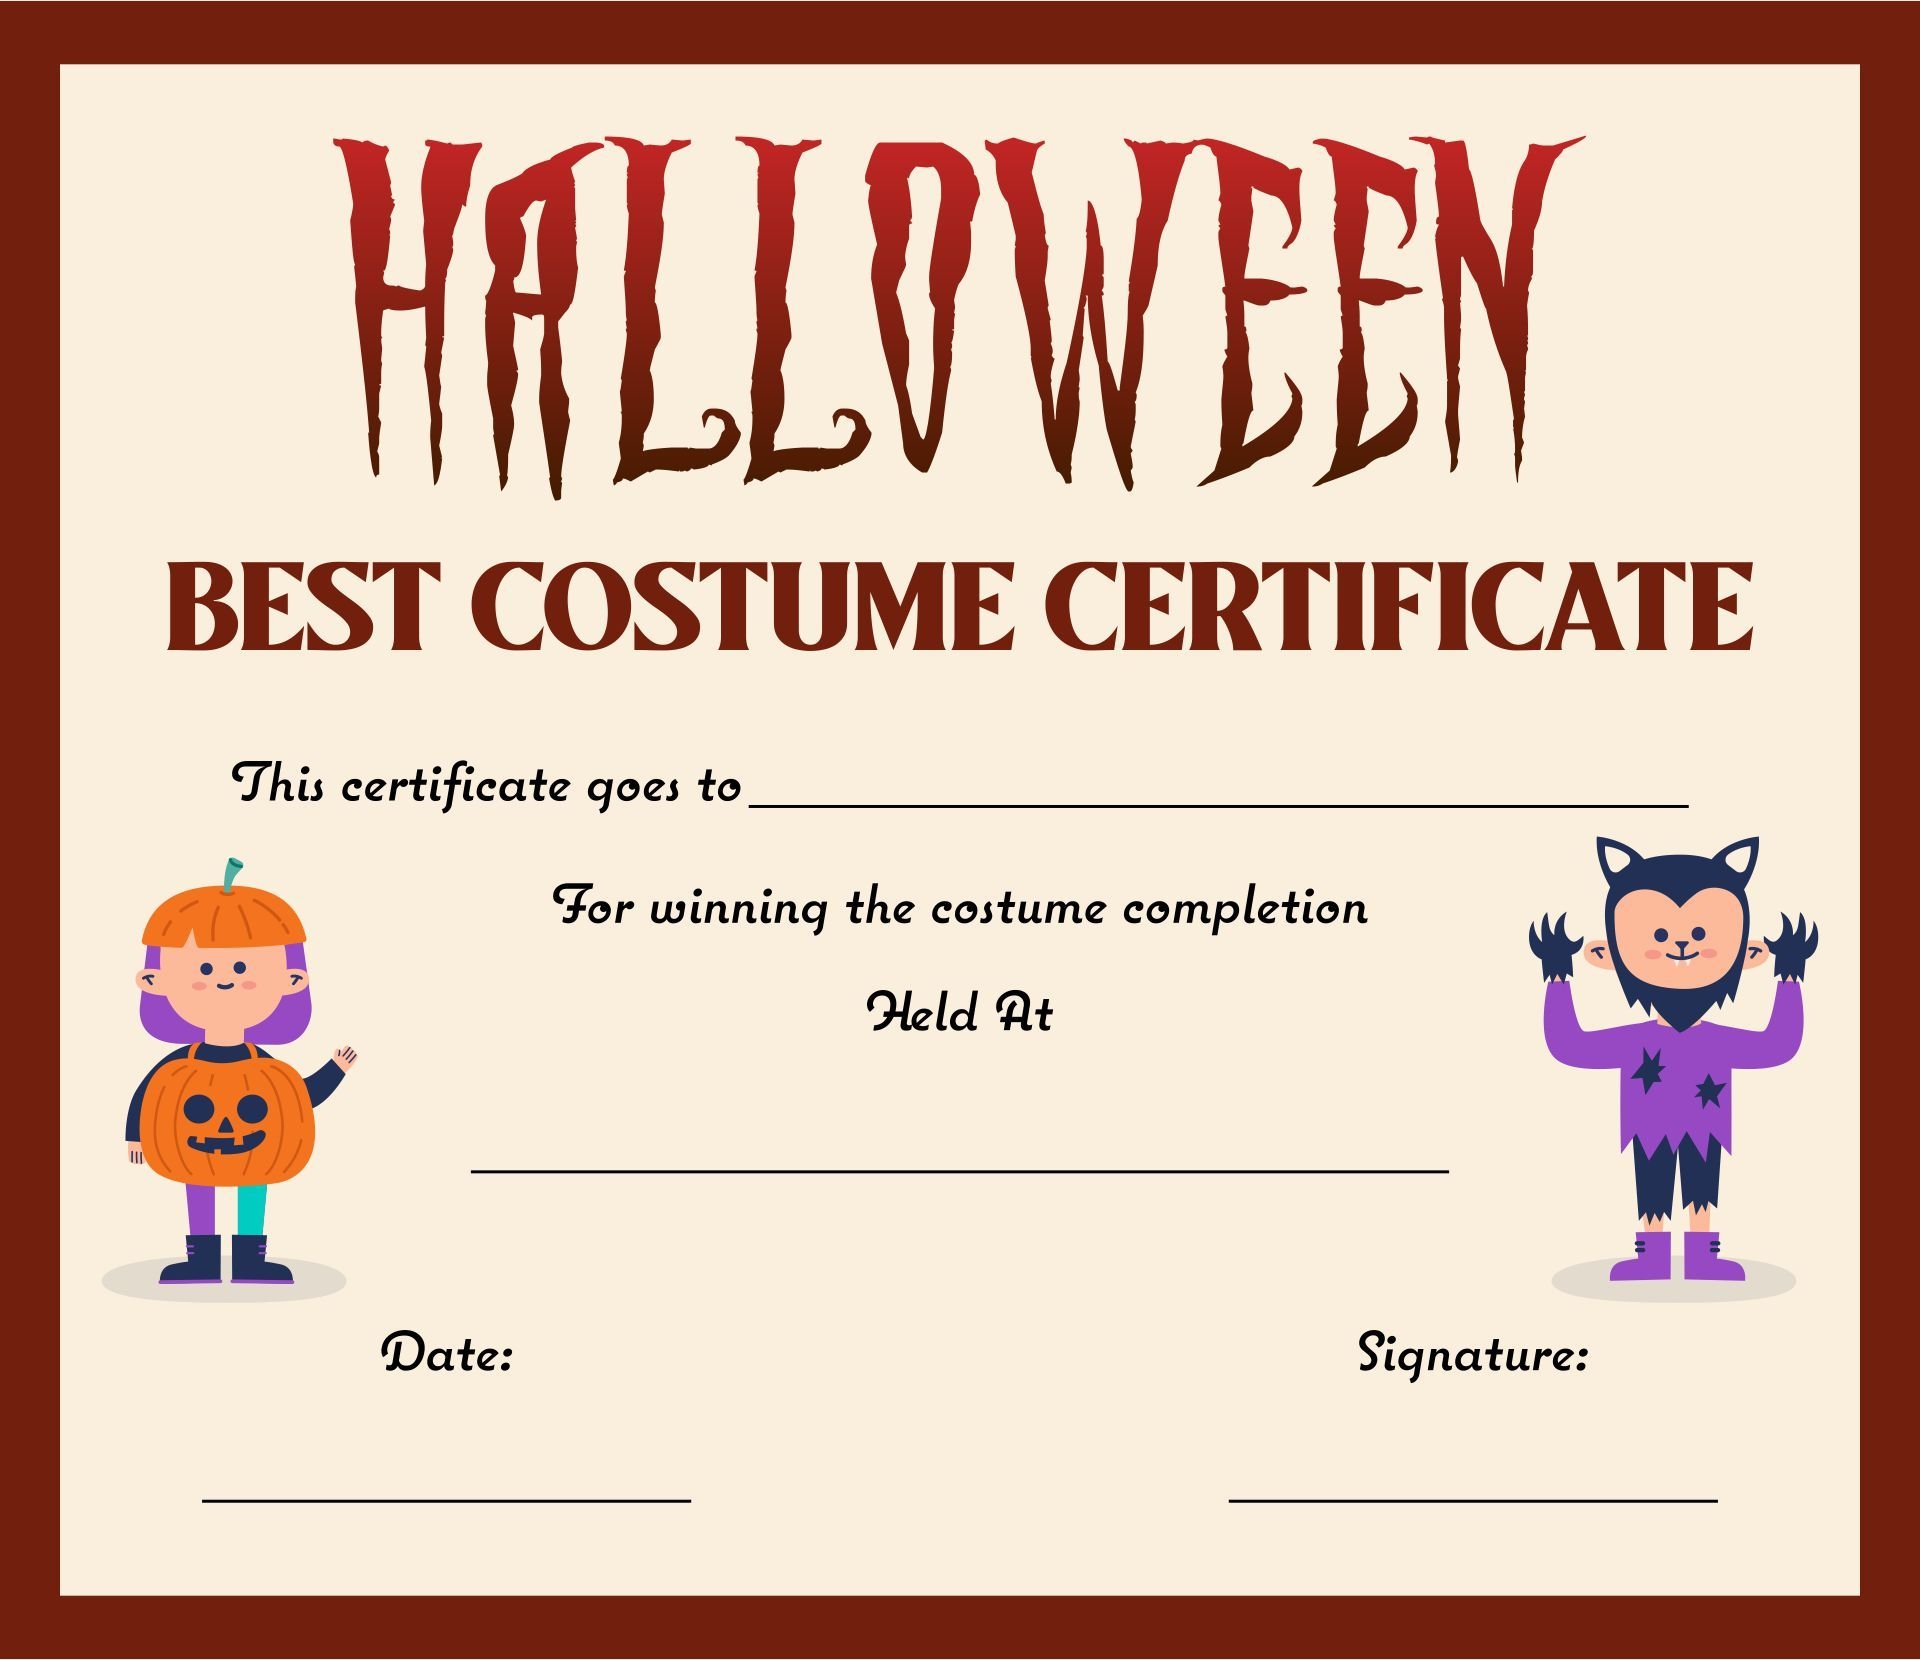 15 Best Halloween Costume Certificates Printable PDF For Free At Printablee Certificate Templates What Is Halloween Folder Templates - Best Costume Certificate Printable Free